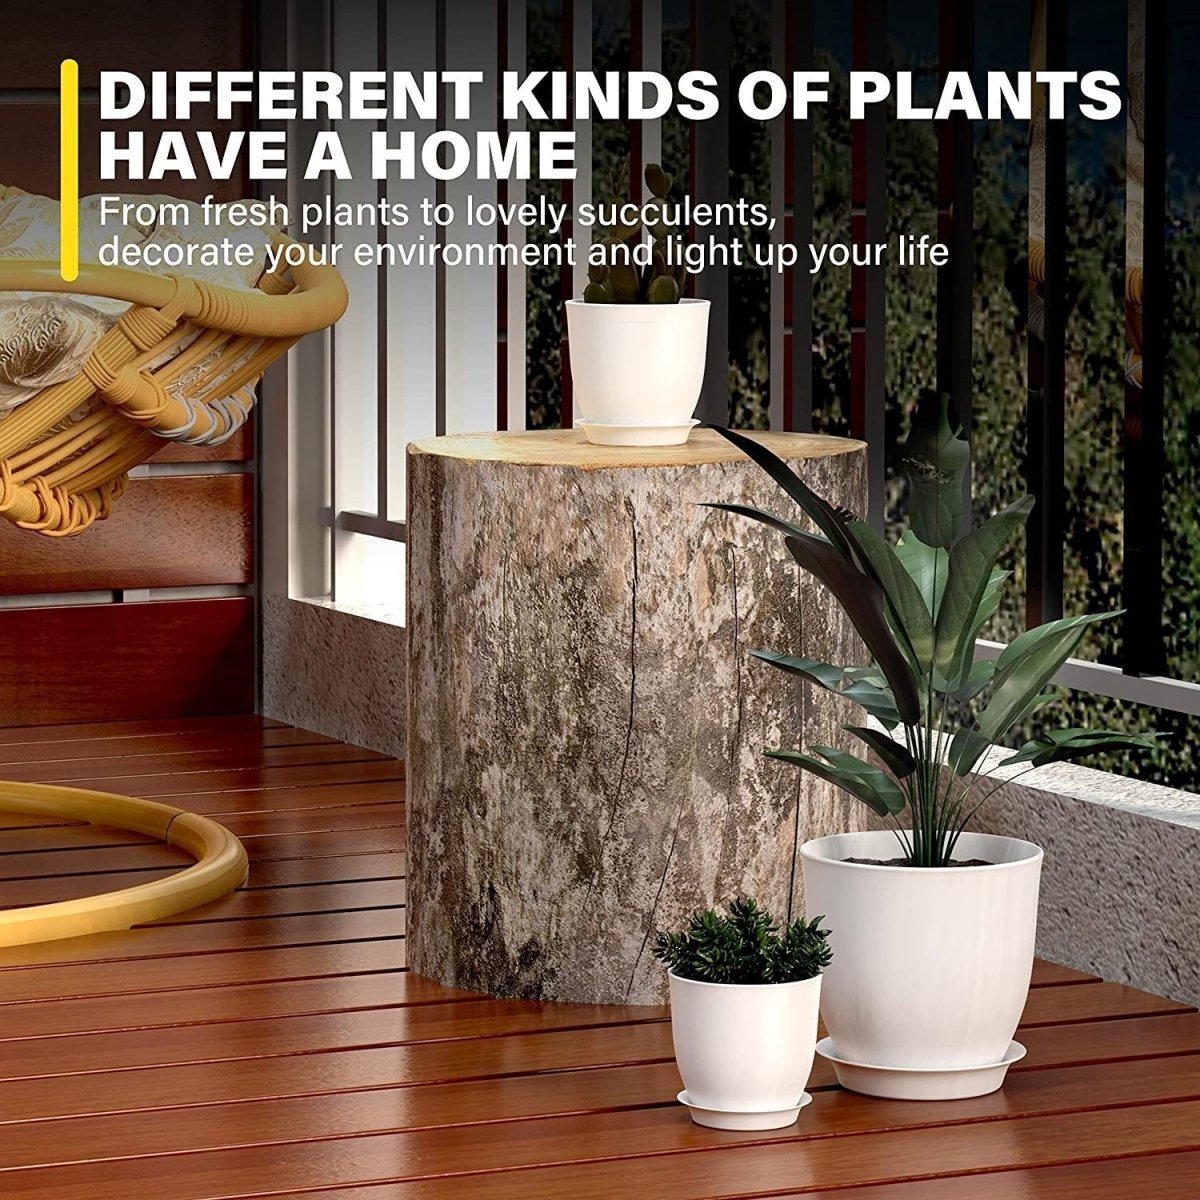 iPower Plastic Planter Pots 5 PCS Set 4.5-7.1 Inch Plant Pot Indoor Modern Decorative Nursery with Drainage Holes and Tray for All House Plants, Succulents, Flowers, Cactus or Seedling, White - SunSwill